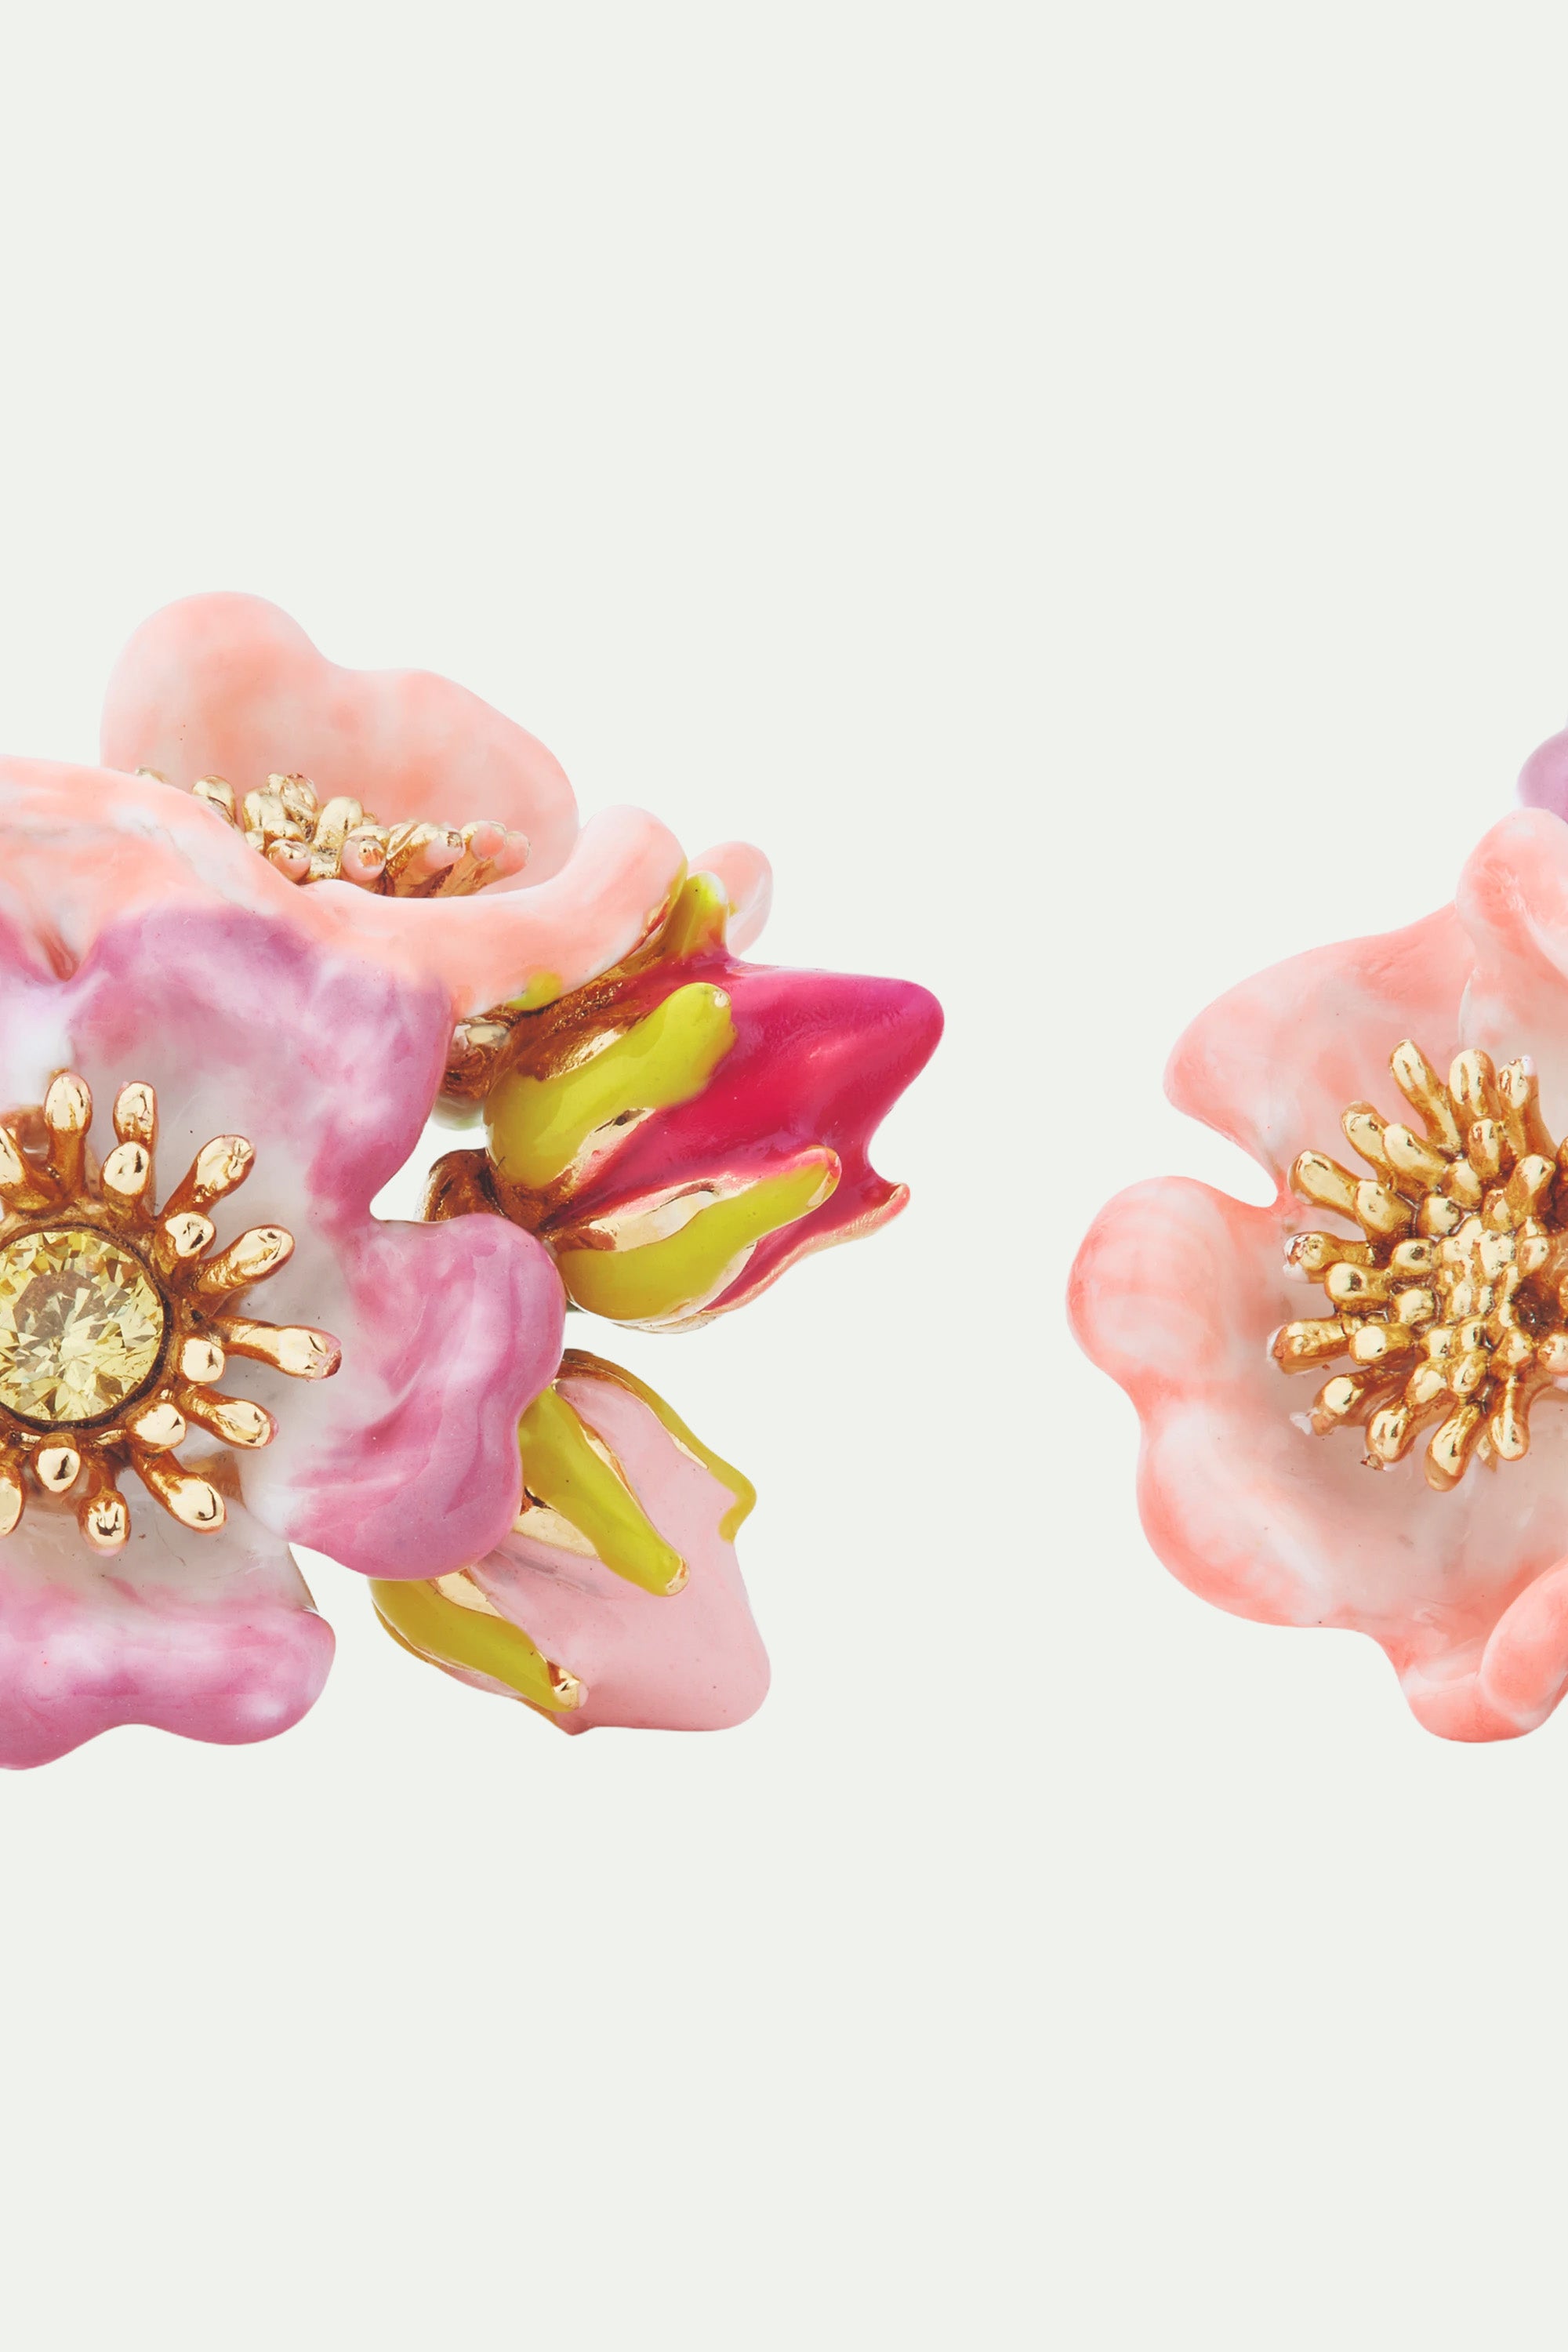 Wild rose and yellow cristal post earrings